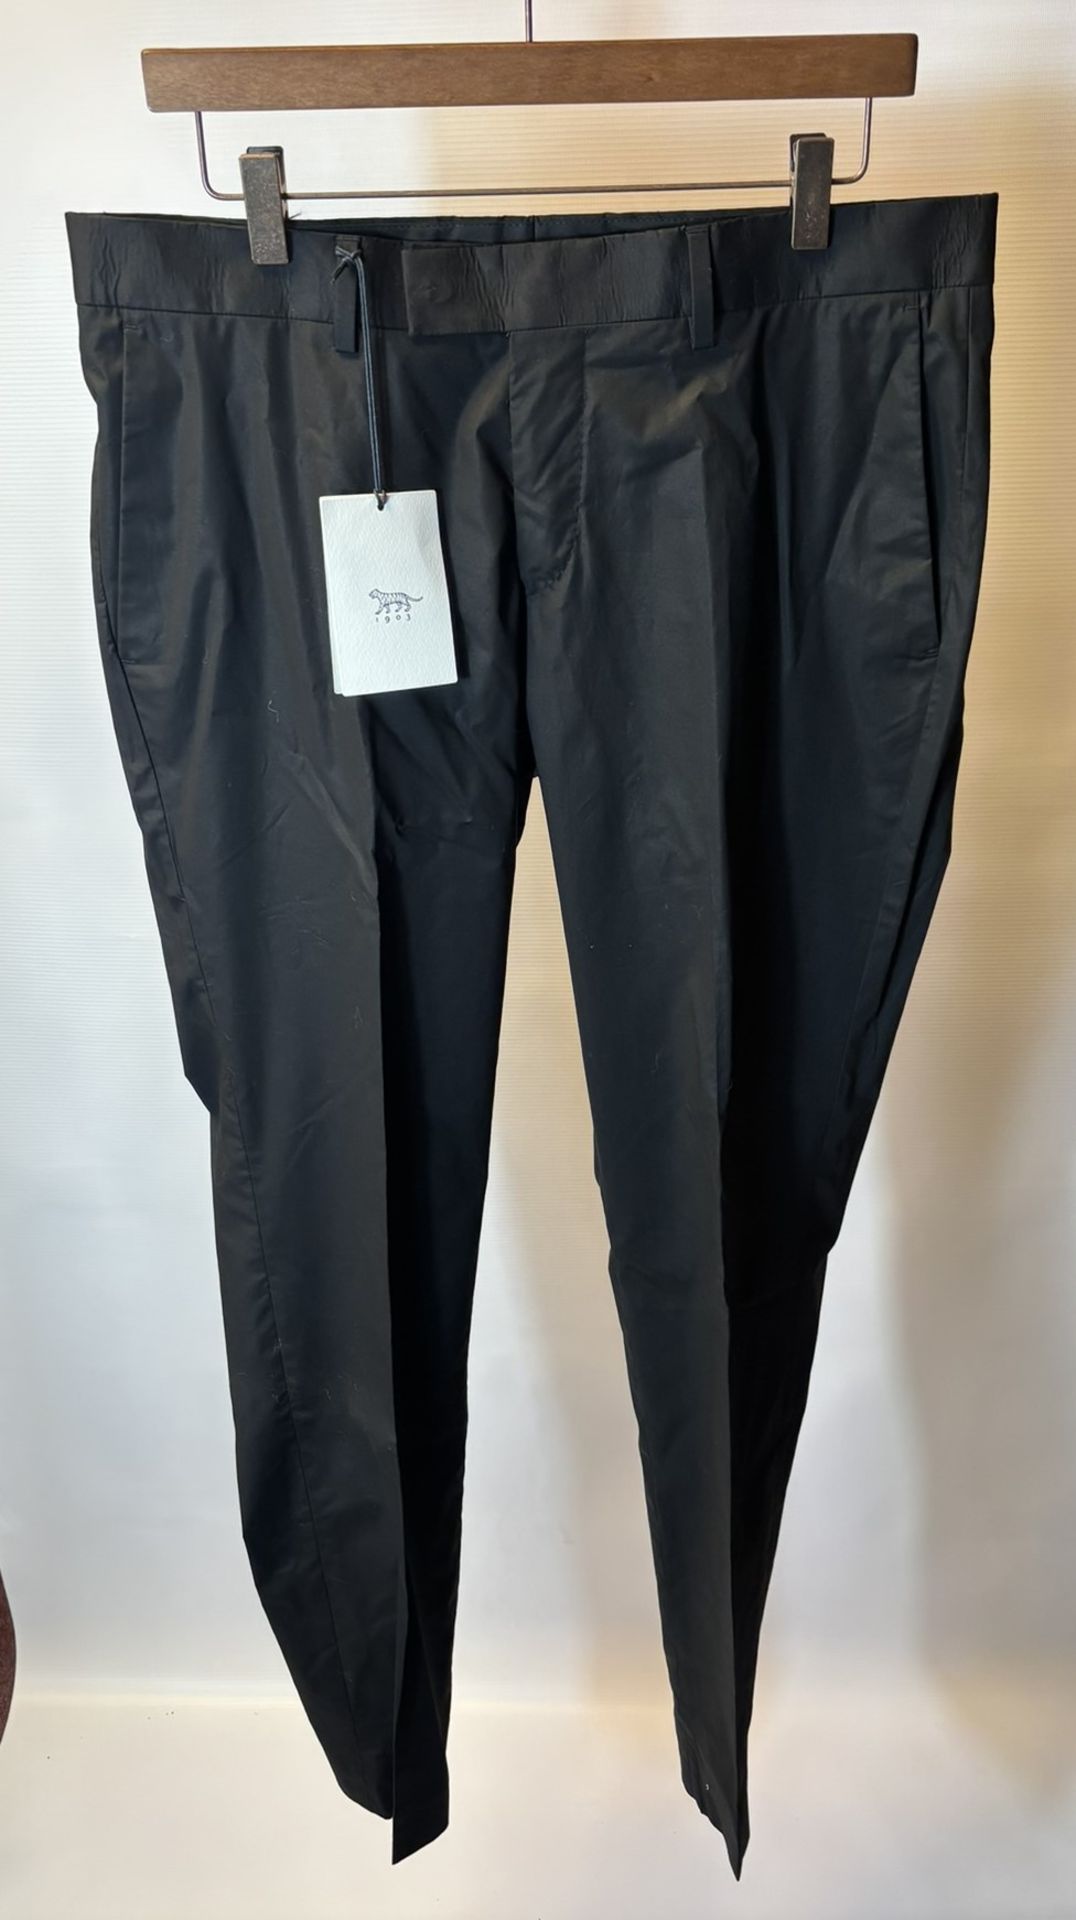 15 x Various Pairs Of Women's Trousers As Seen In Photos - Image 13 of 45